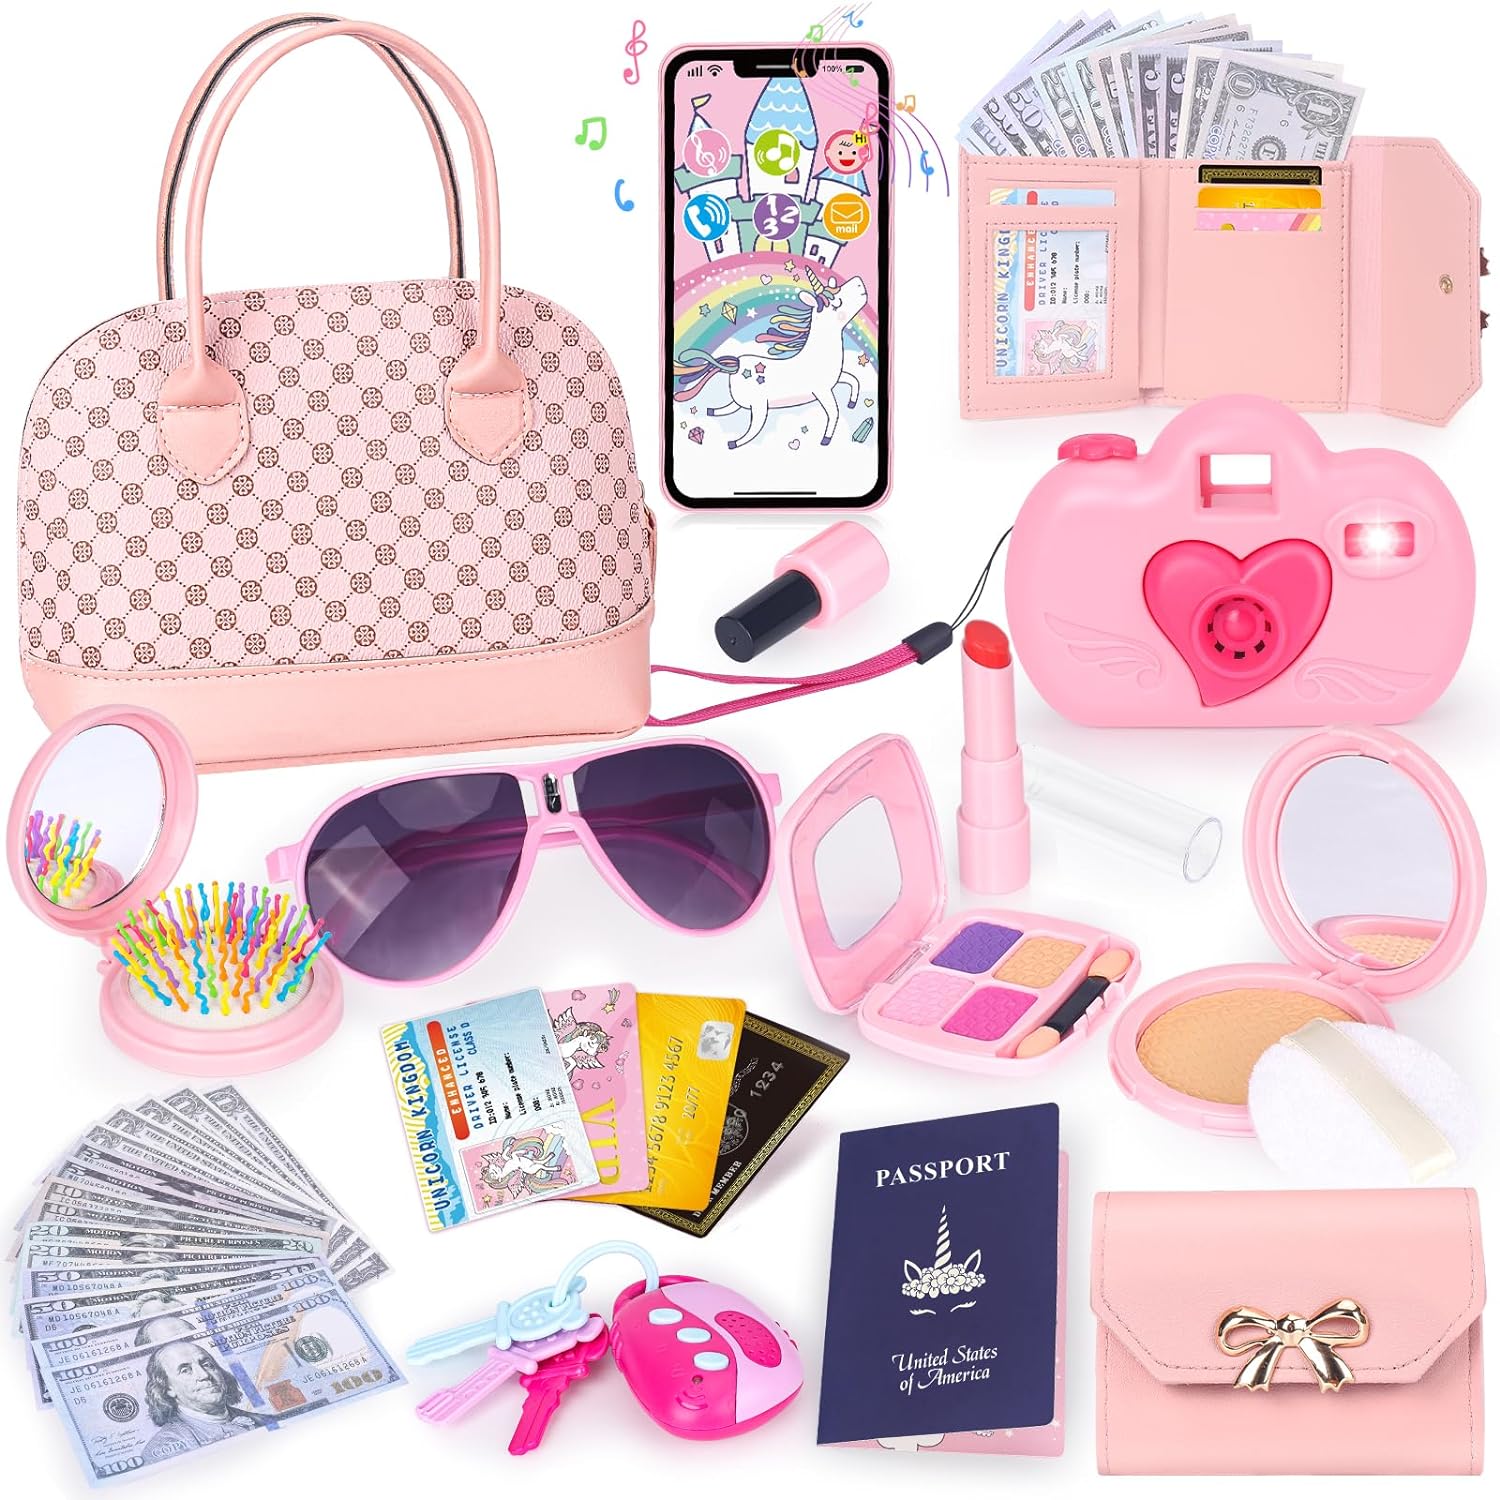 Buy Uzoxlsn 21Pcs Pretend Purse For Little Girls|My First Purse Playset For  Princess With Handbag|Smartphone|Sunglasses|Wallet|Key|Credit Card|Makeup  Toy|Birthday Gift For Girl Ages 3 to 12 Online at Low Prices in India -  Amazon.in